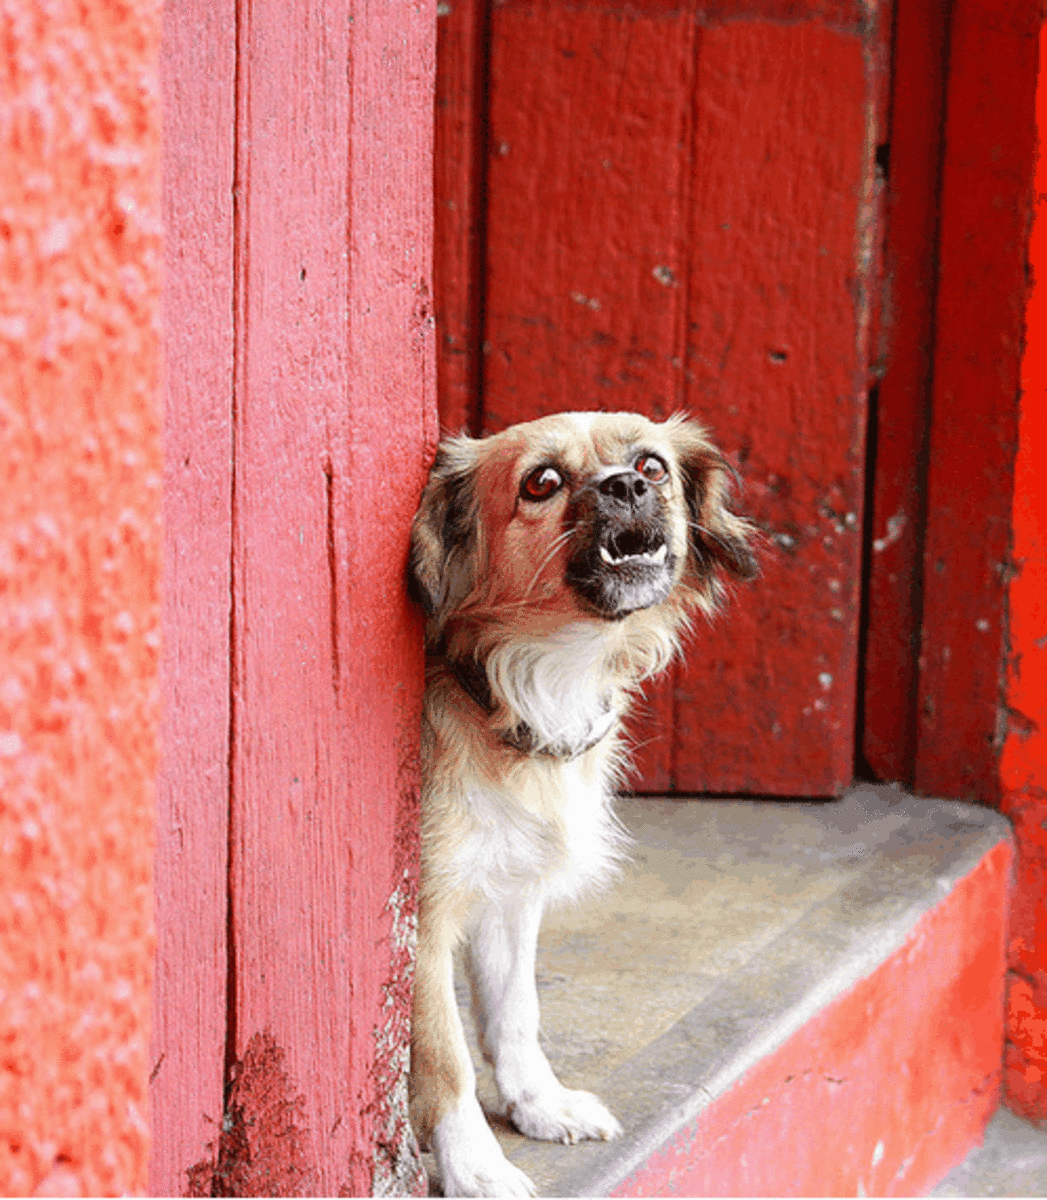 How to Make Dogs Less Reactive Towards Doorbells, Knocking and Guests